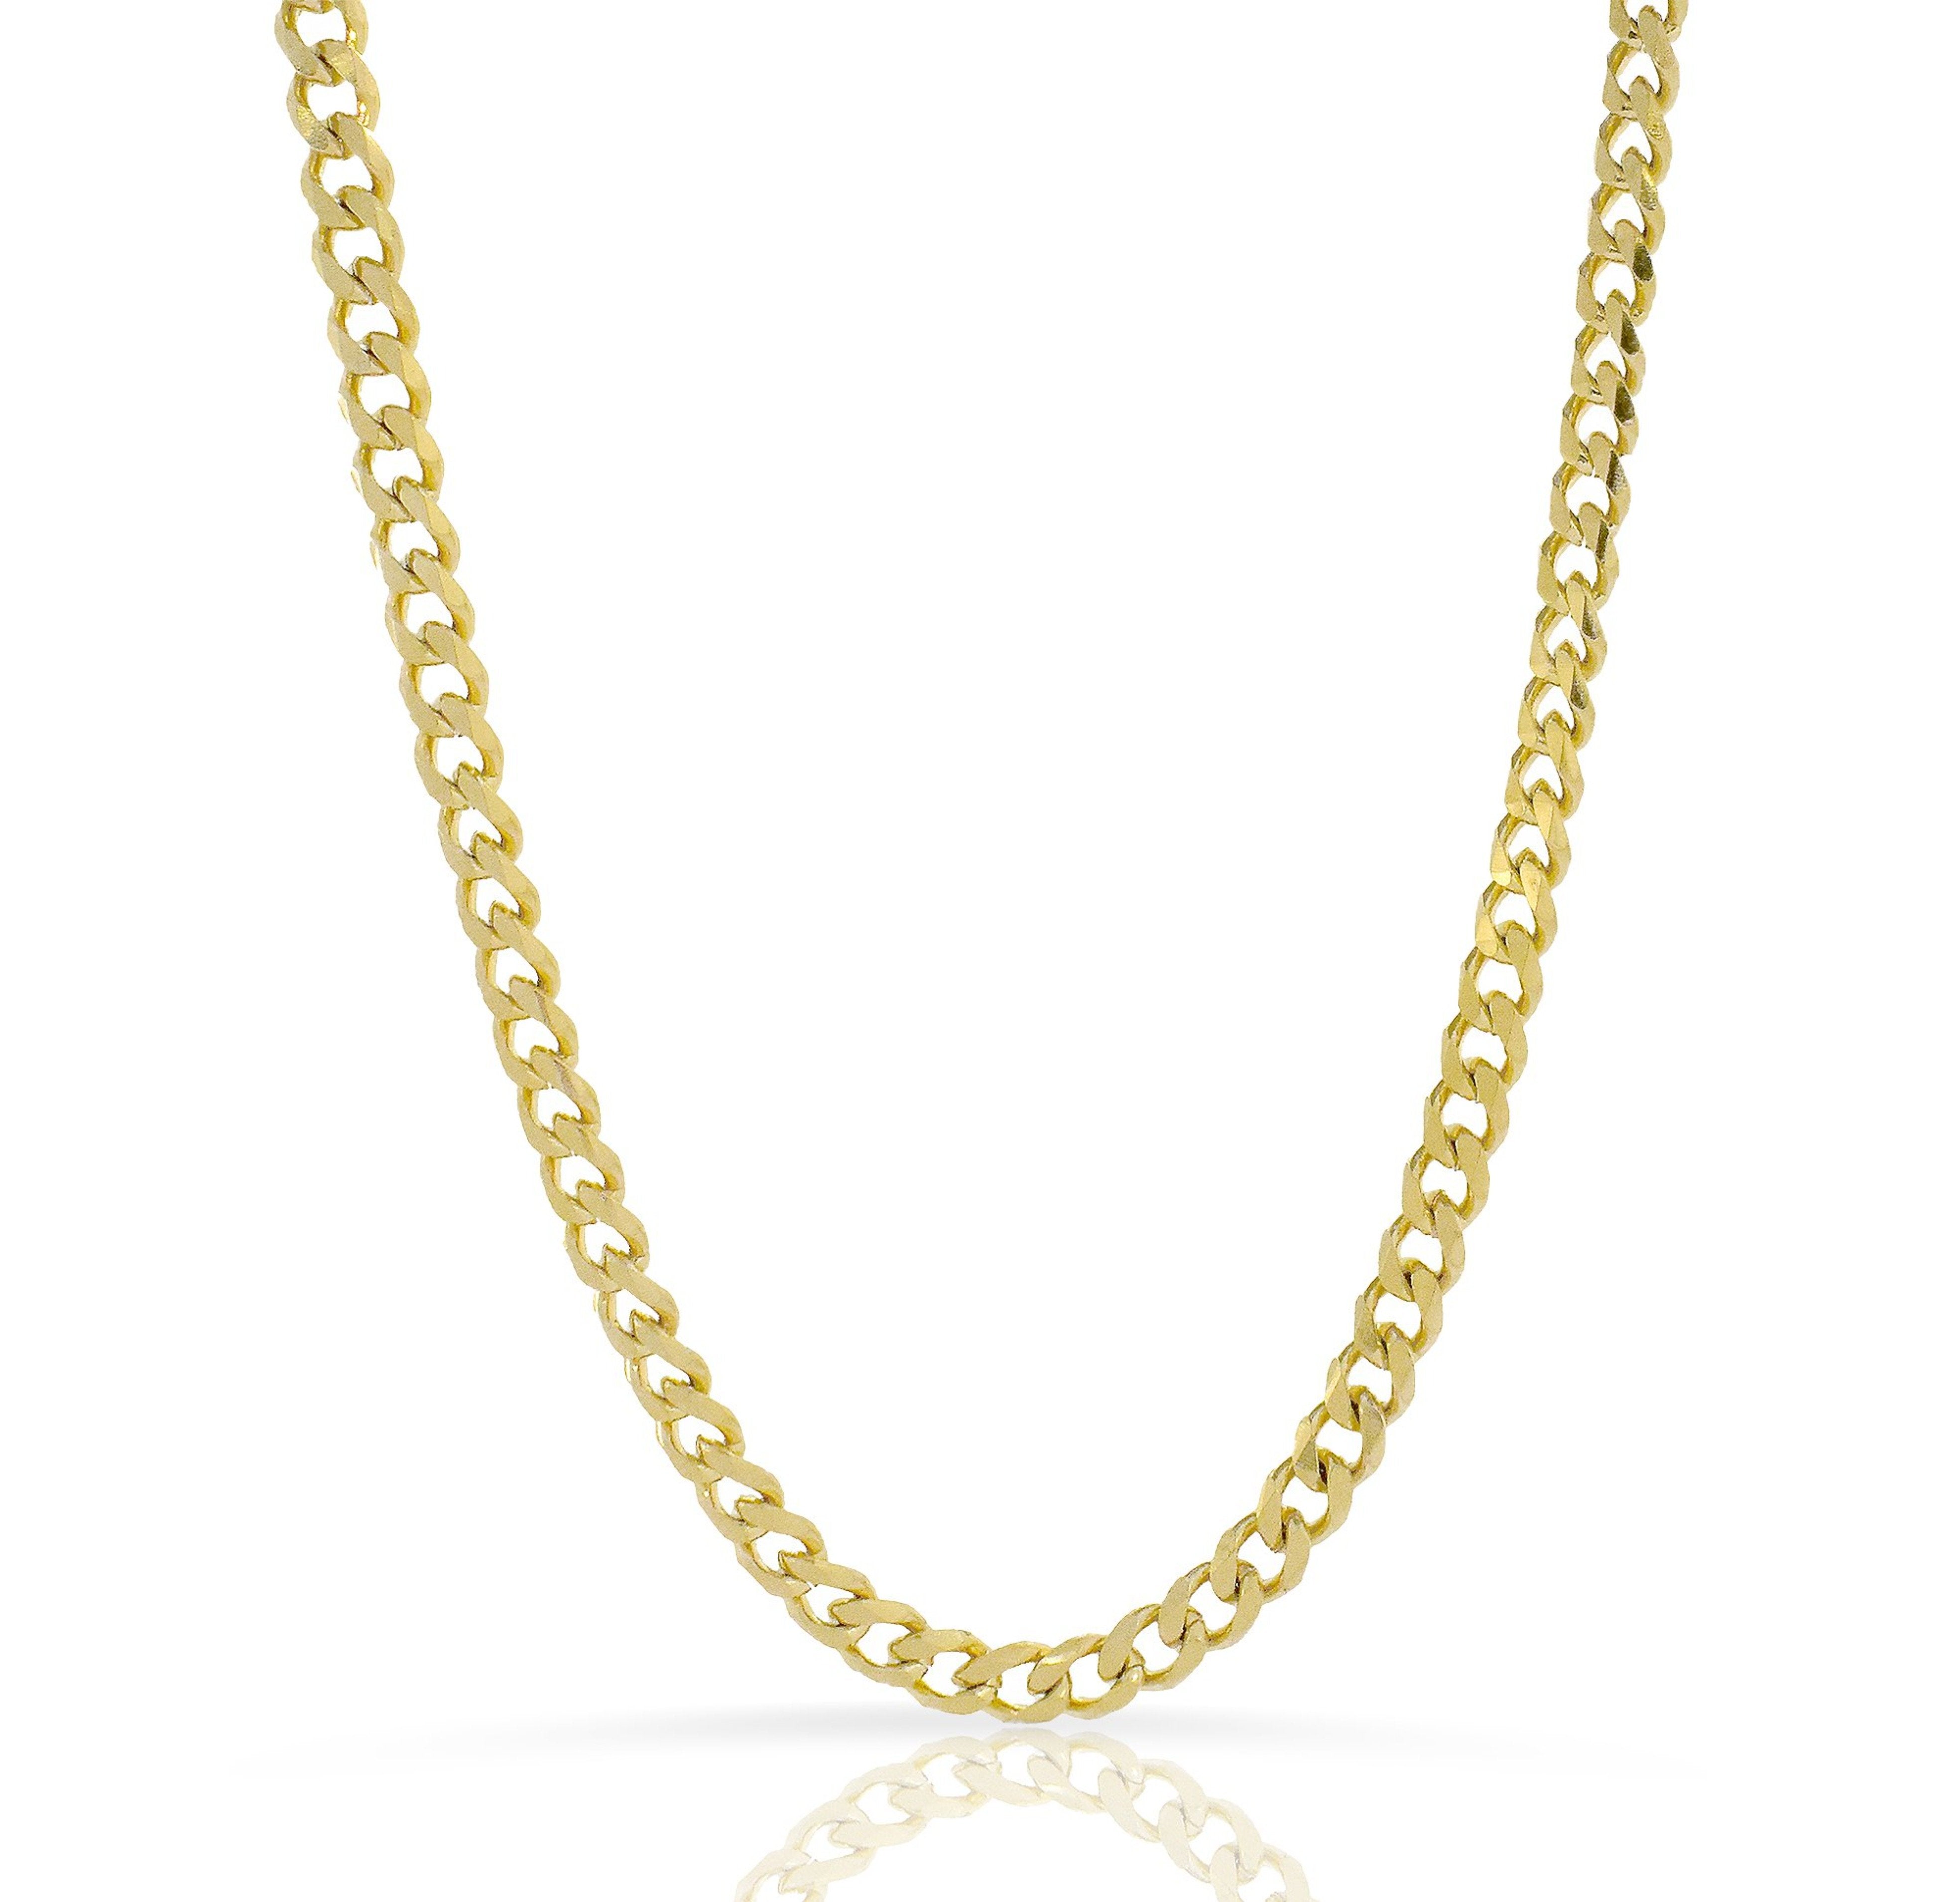 gold chain necklace waterproof jewelry gold